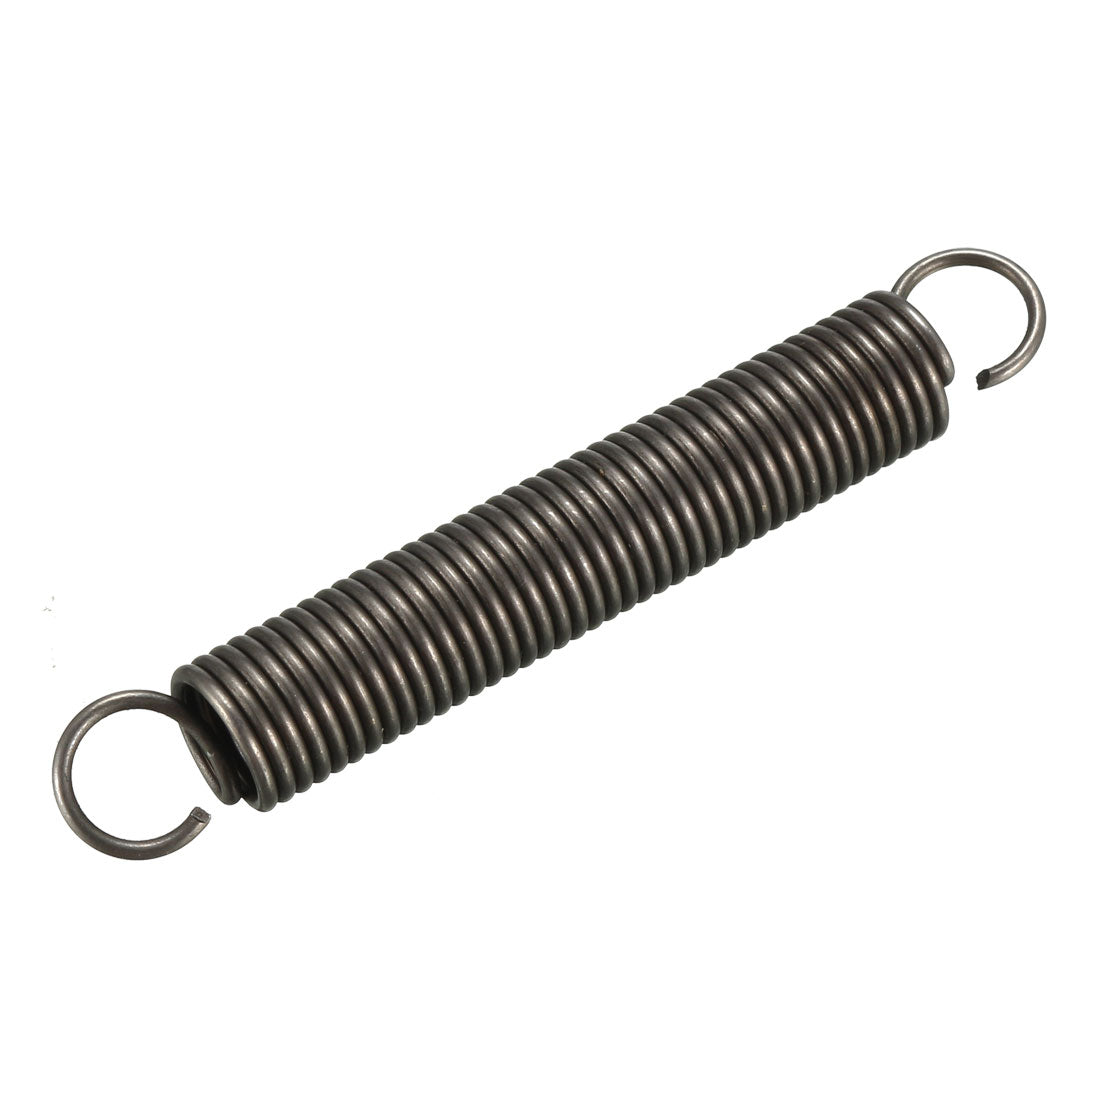 uxcell Uxcell Extended Tension Spring Wire Diameter 0.047", OD 0.39", Free Length 2.76" 4pcs